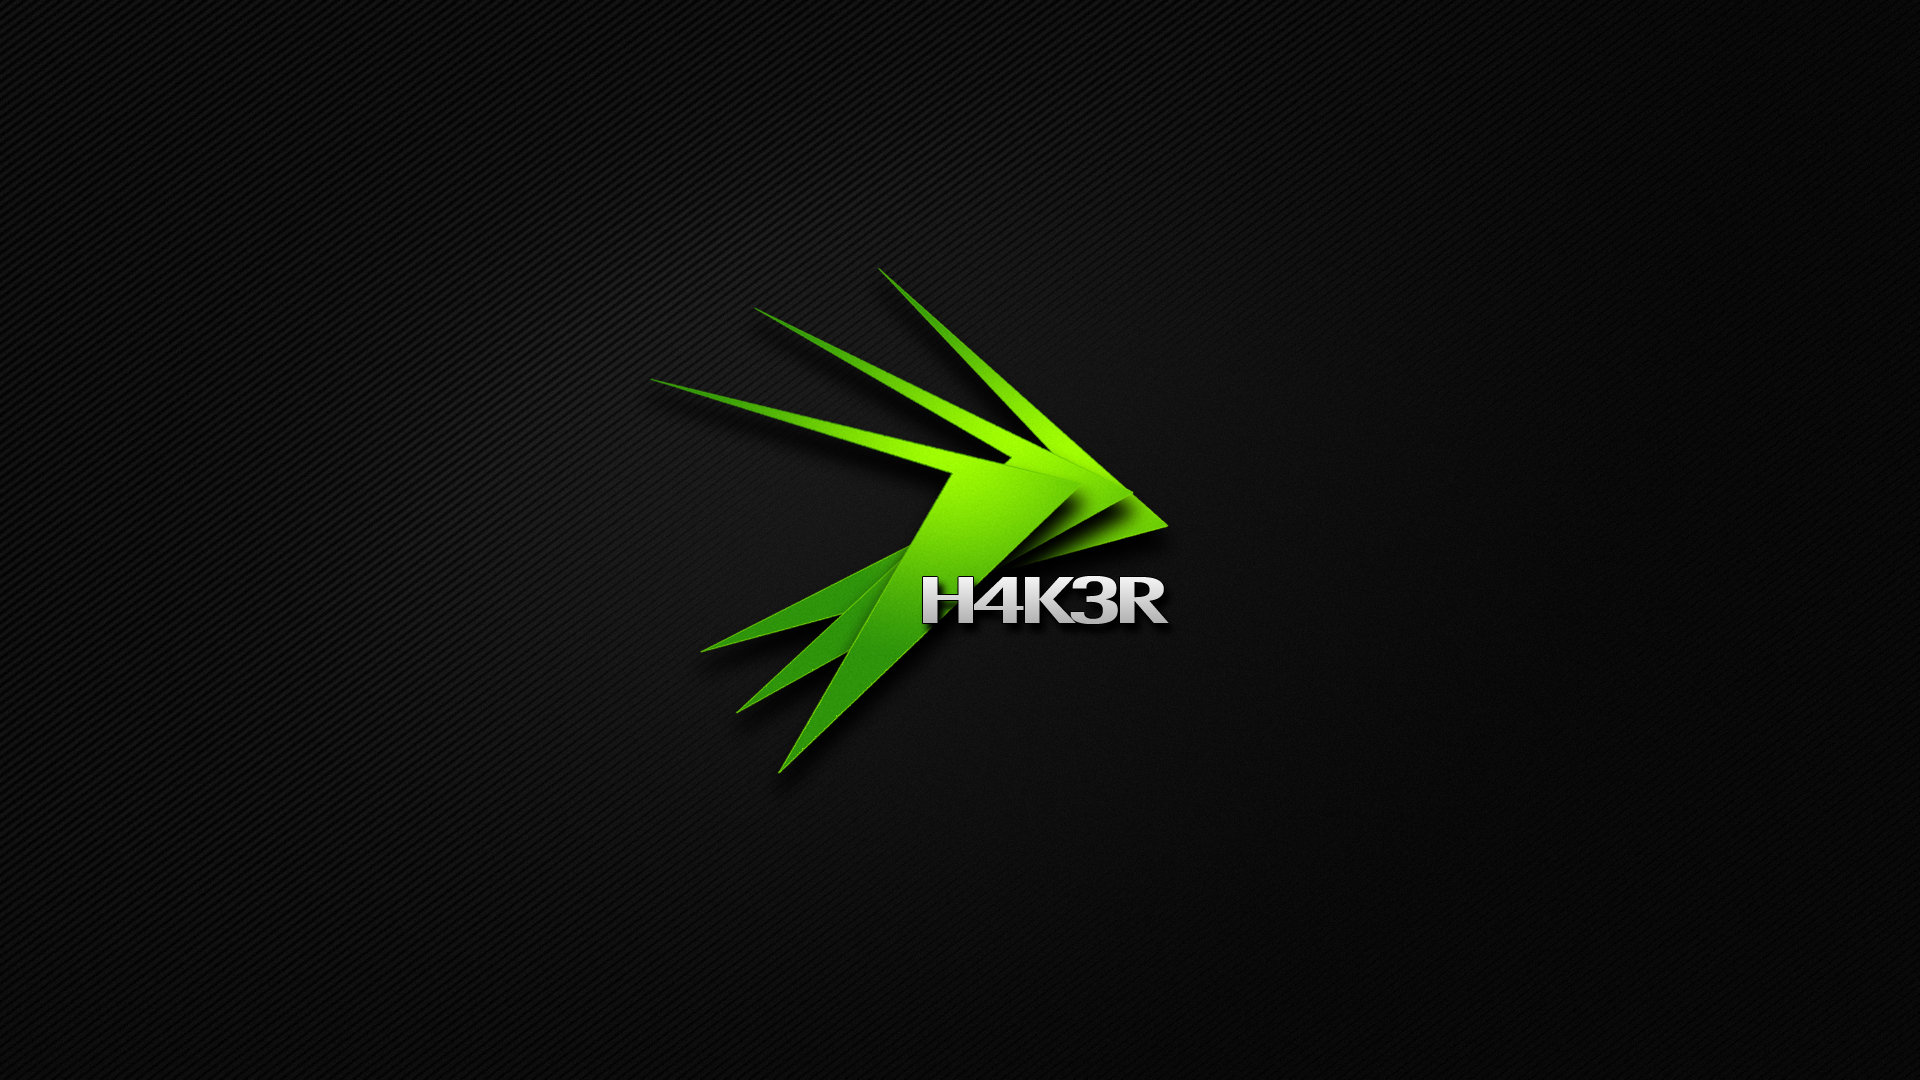  hackinG wallpaper Tagged with hacking desktops hacking wallpapers